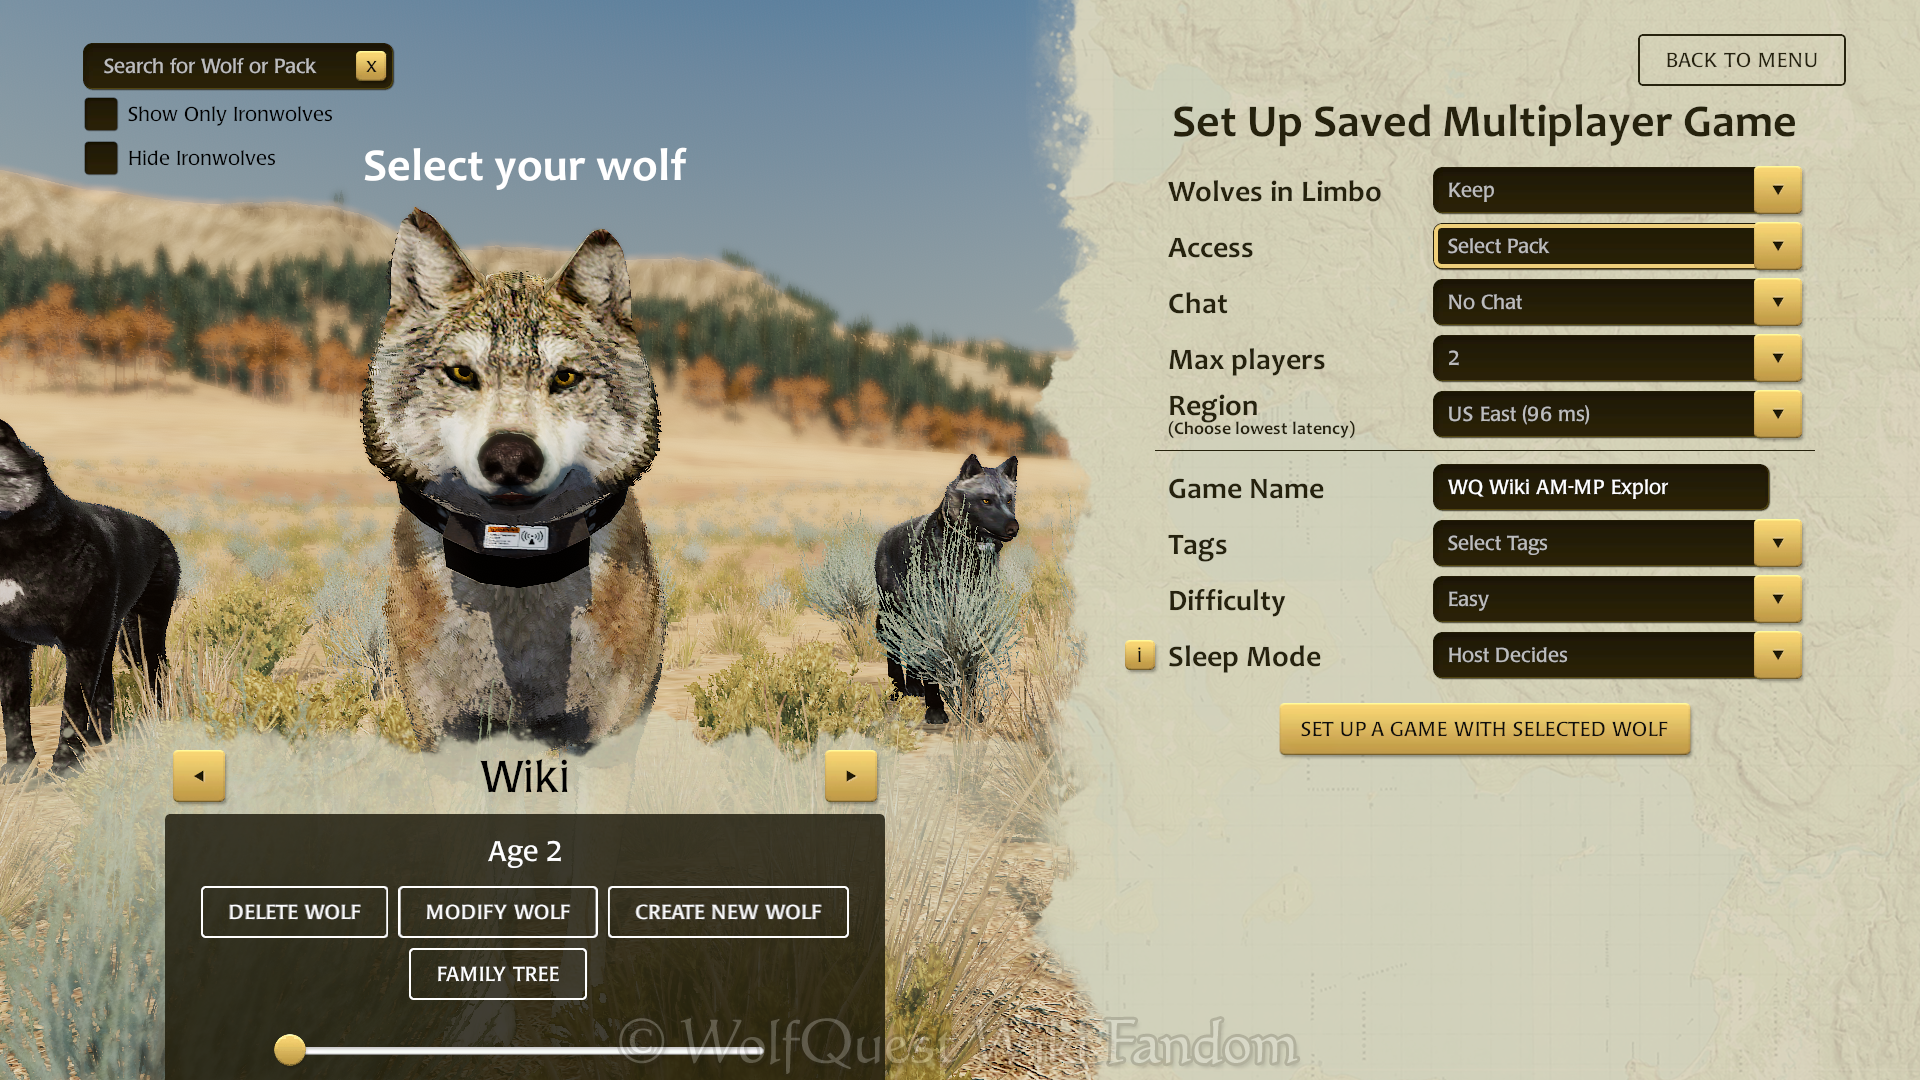 wolfquest 2.5 multiplayer sign up